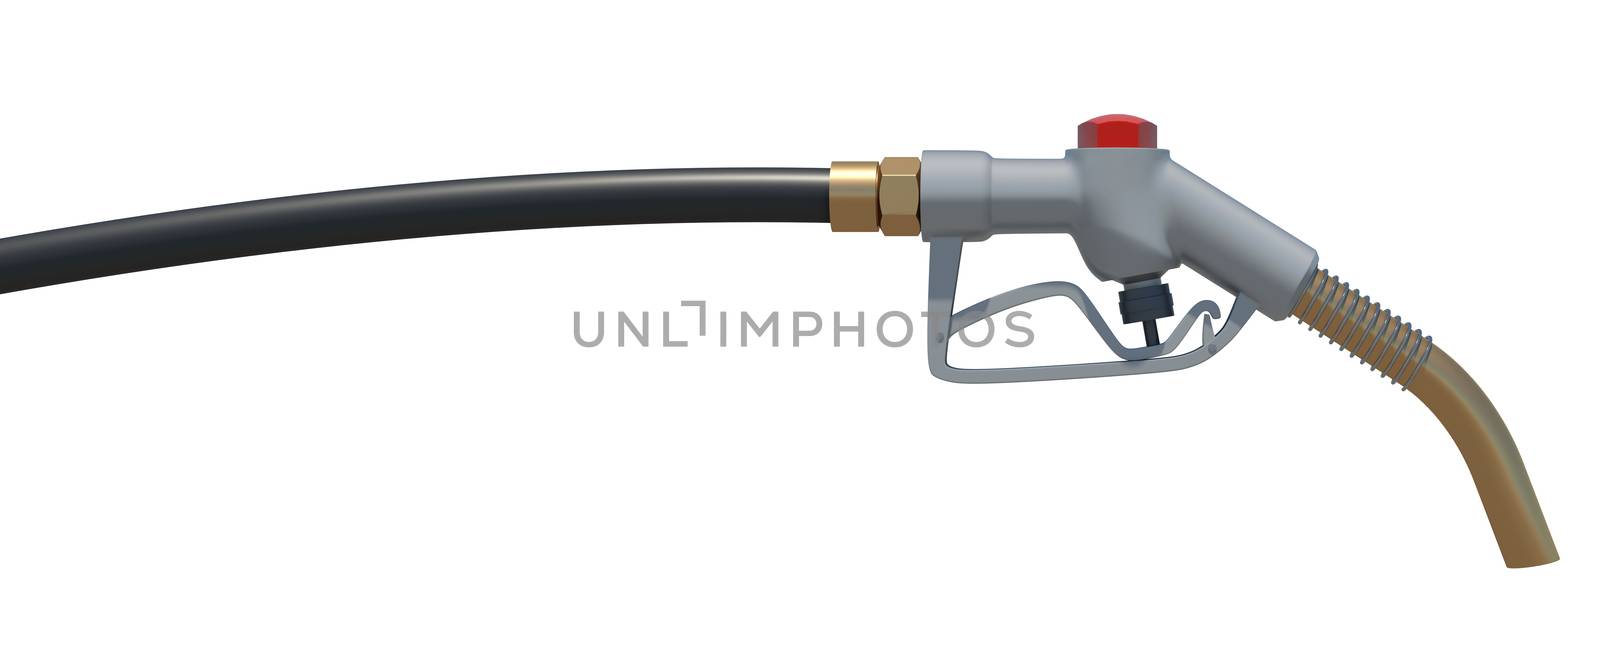 Gas hose nozzle. Front view. Isolated render on white background